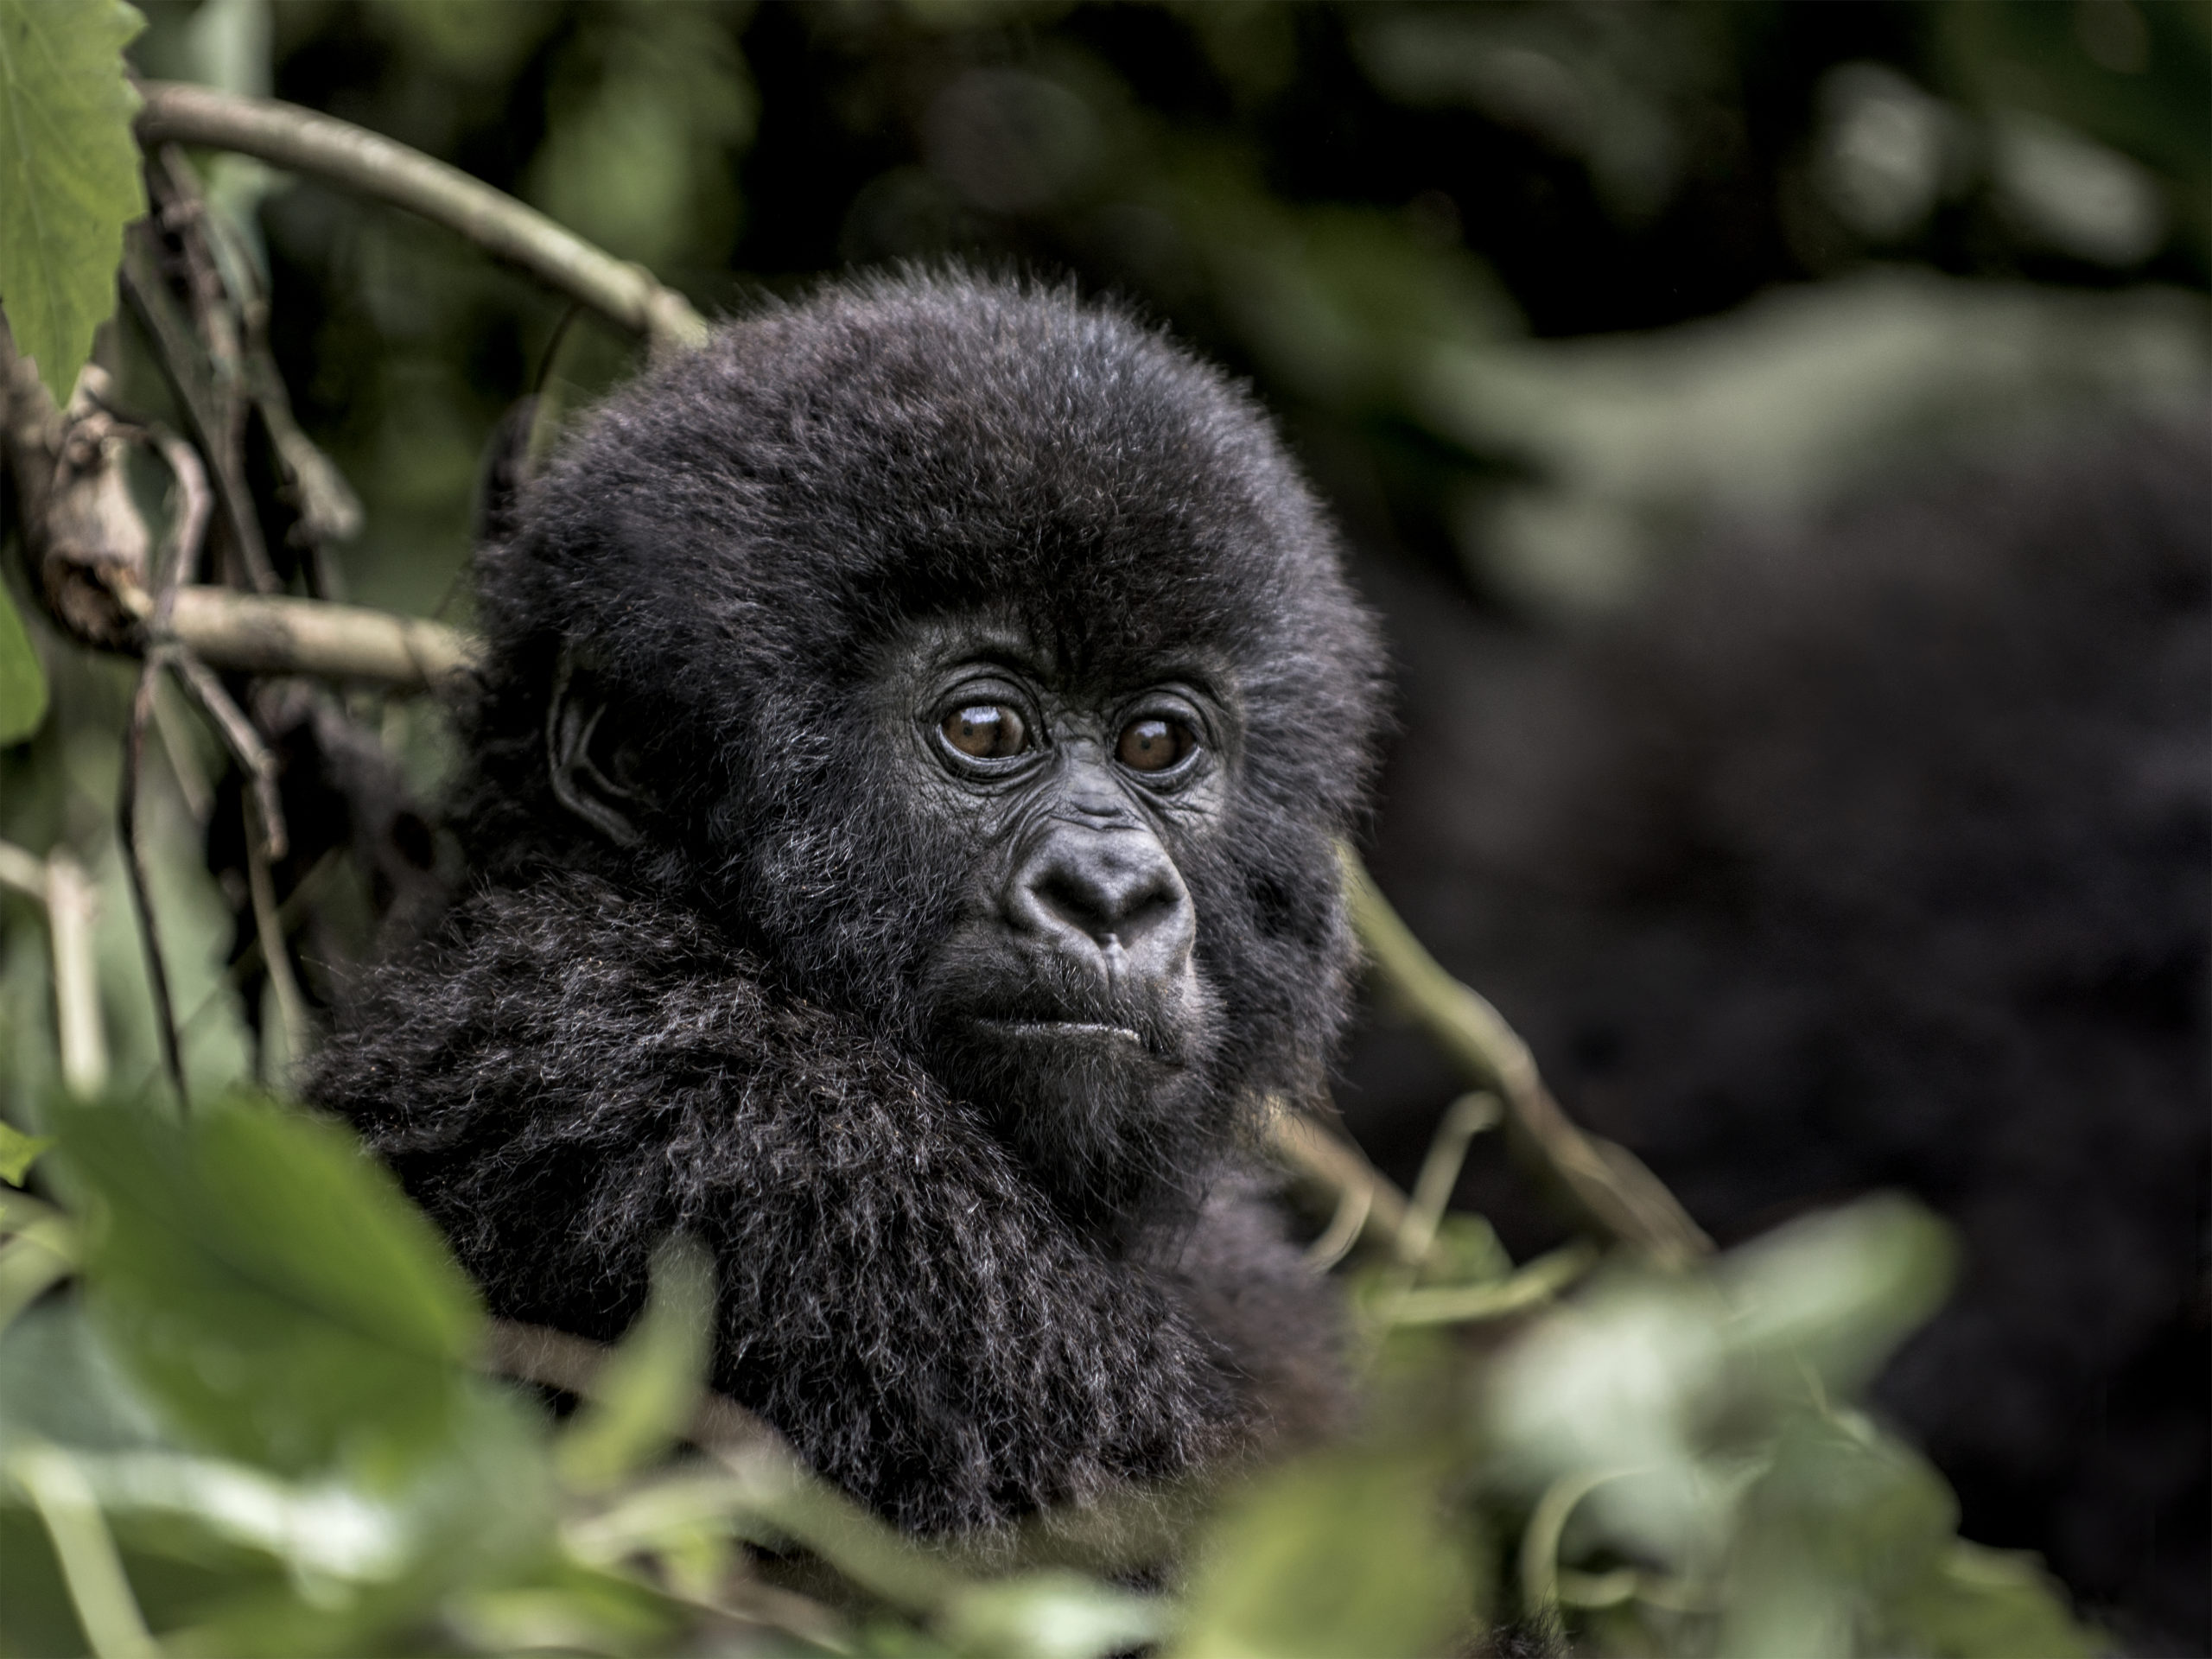 A conservation victory for the mountain gorillas of the Virungas!